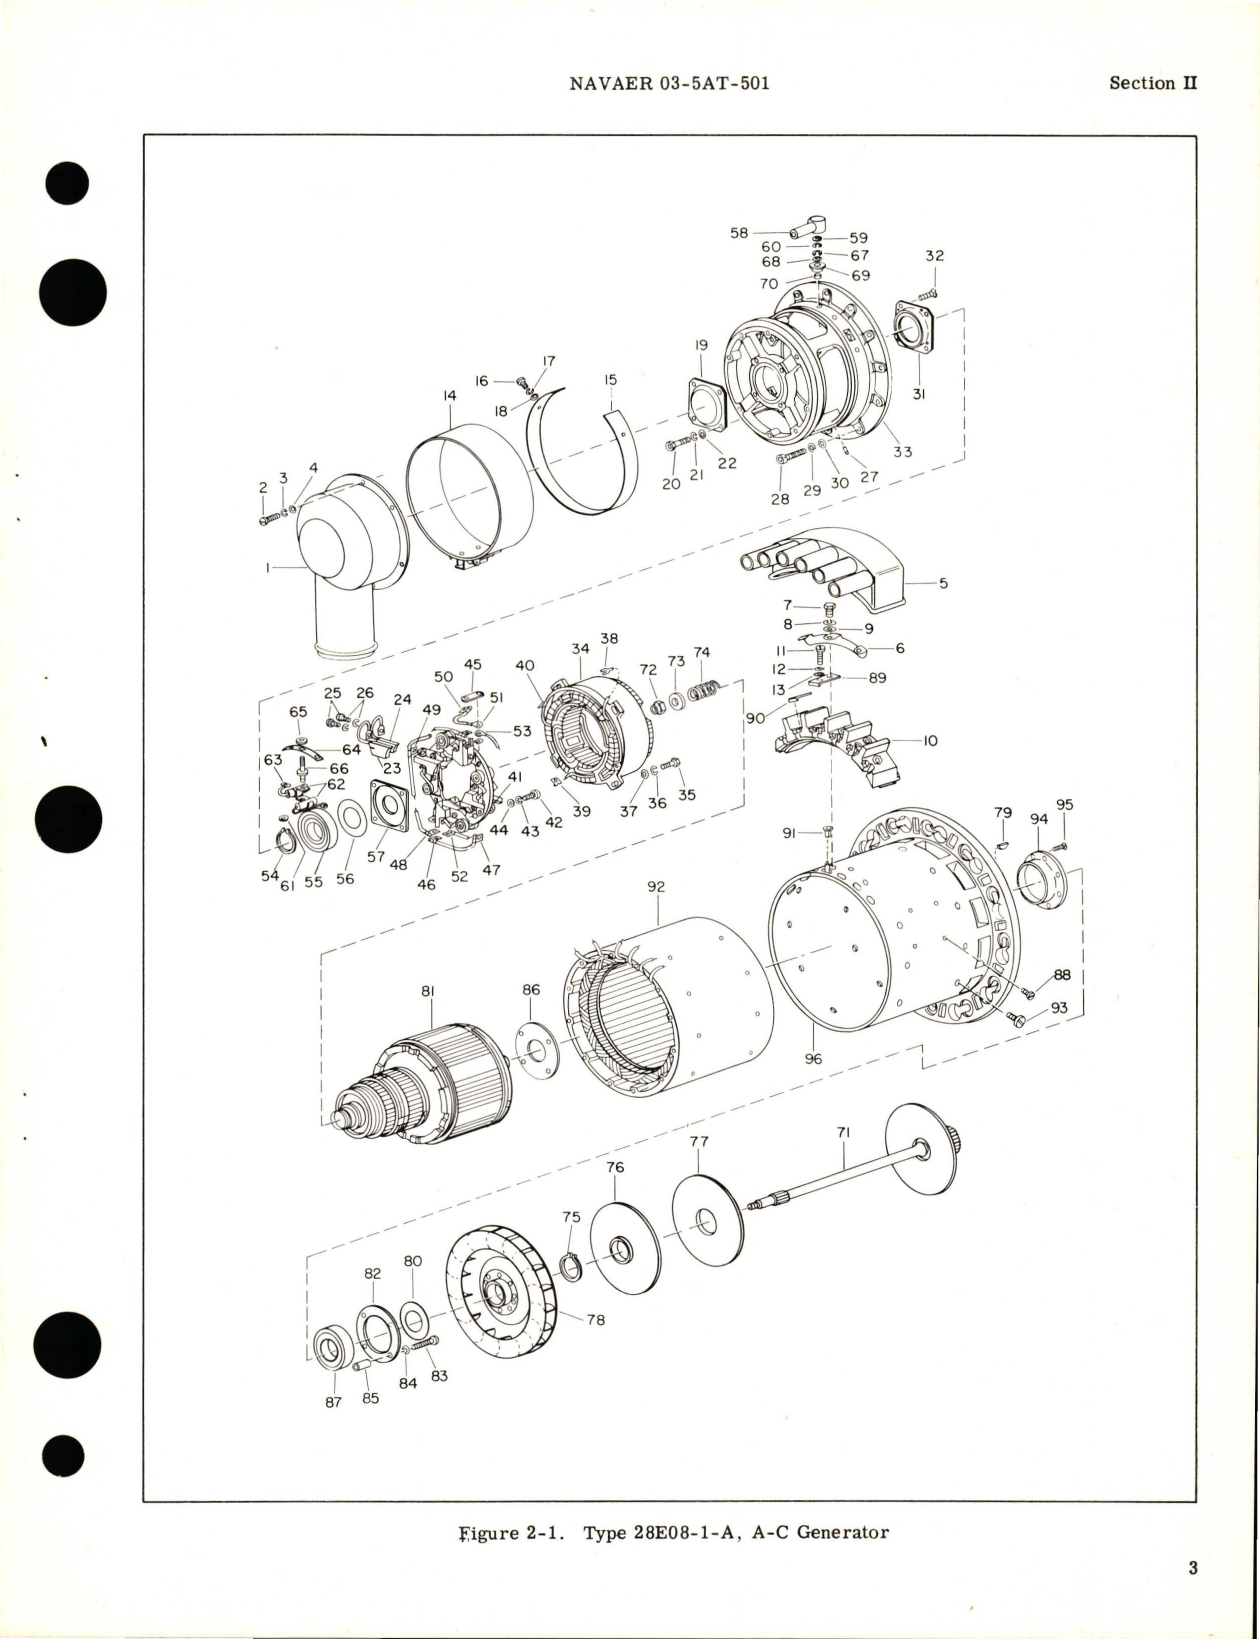 Sample page 7 from AirCorps Library document: Overhaul Instructions for A-C Generators for Types 28E08-1-A and 28E08-3-A